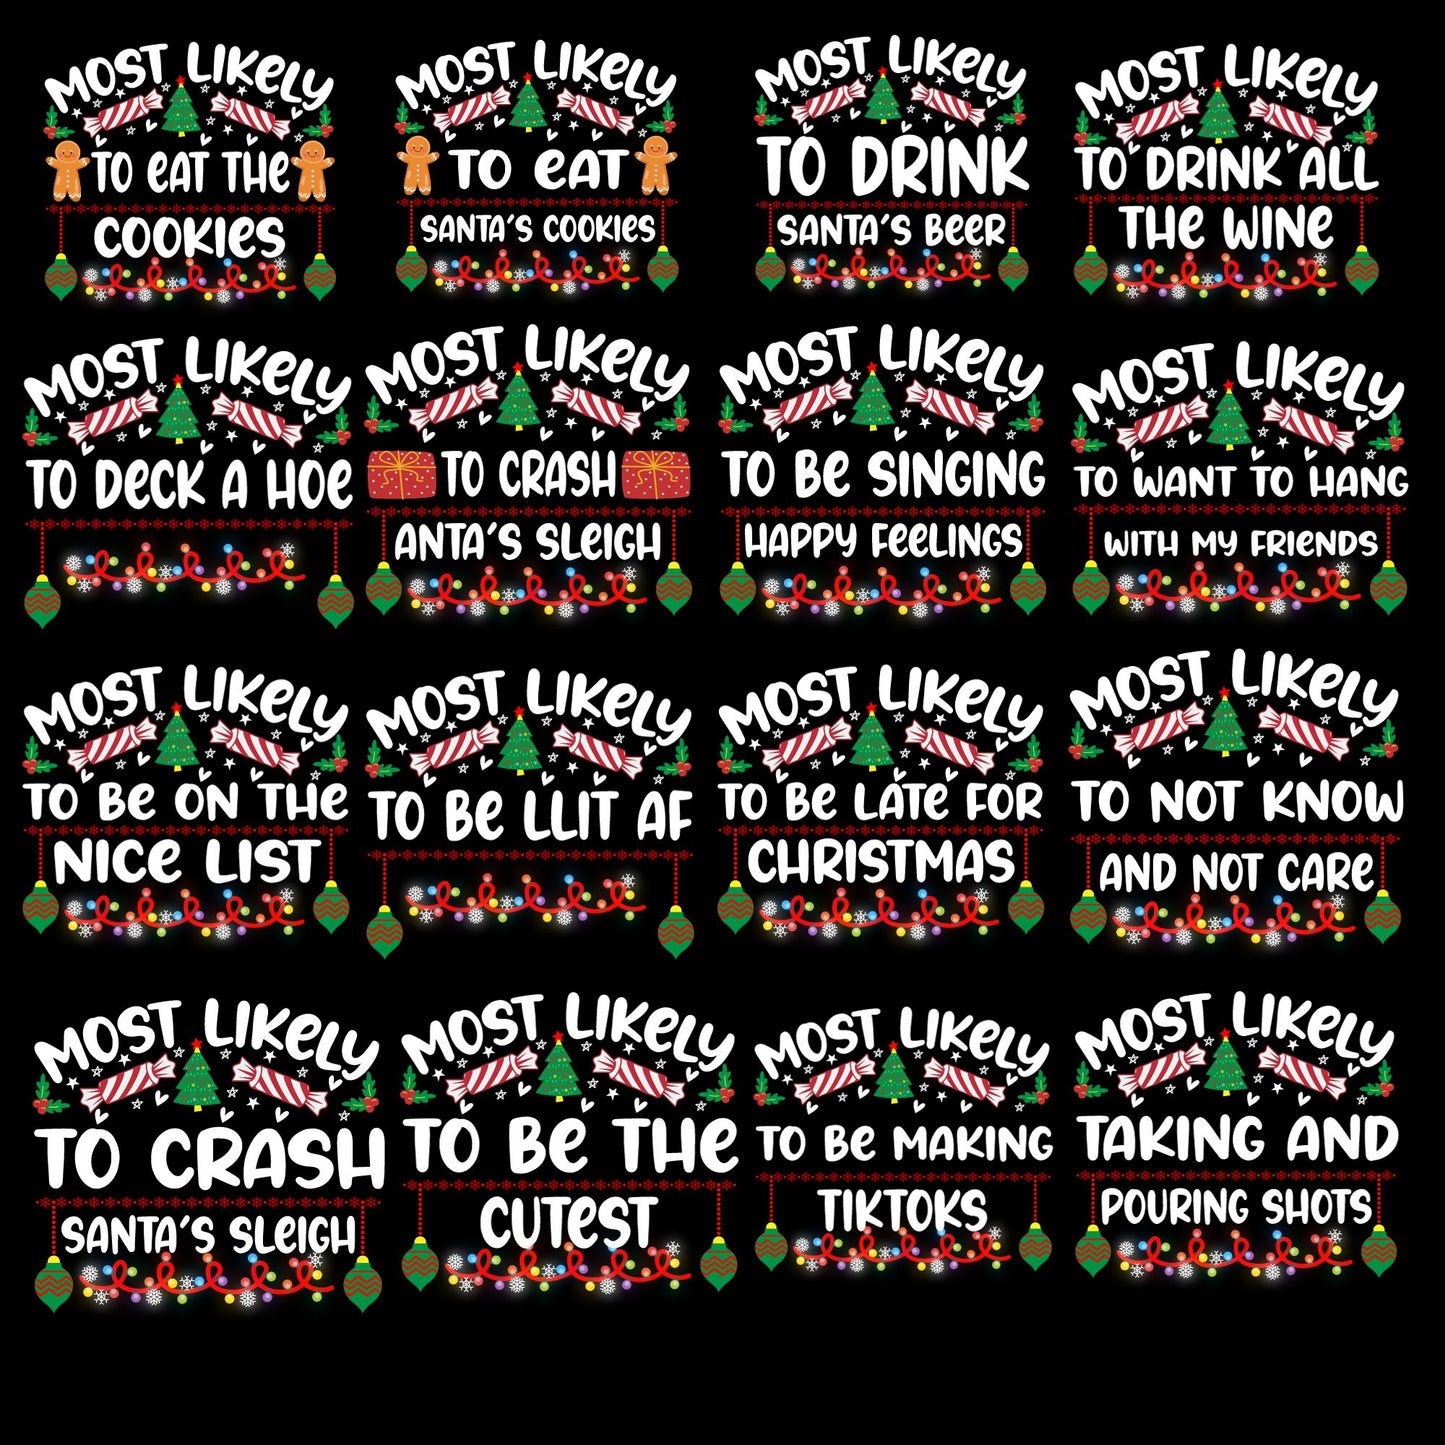 Most Likely To, Funny Christmas Family Shirts